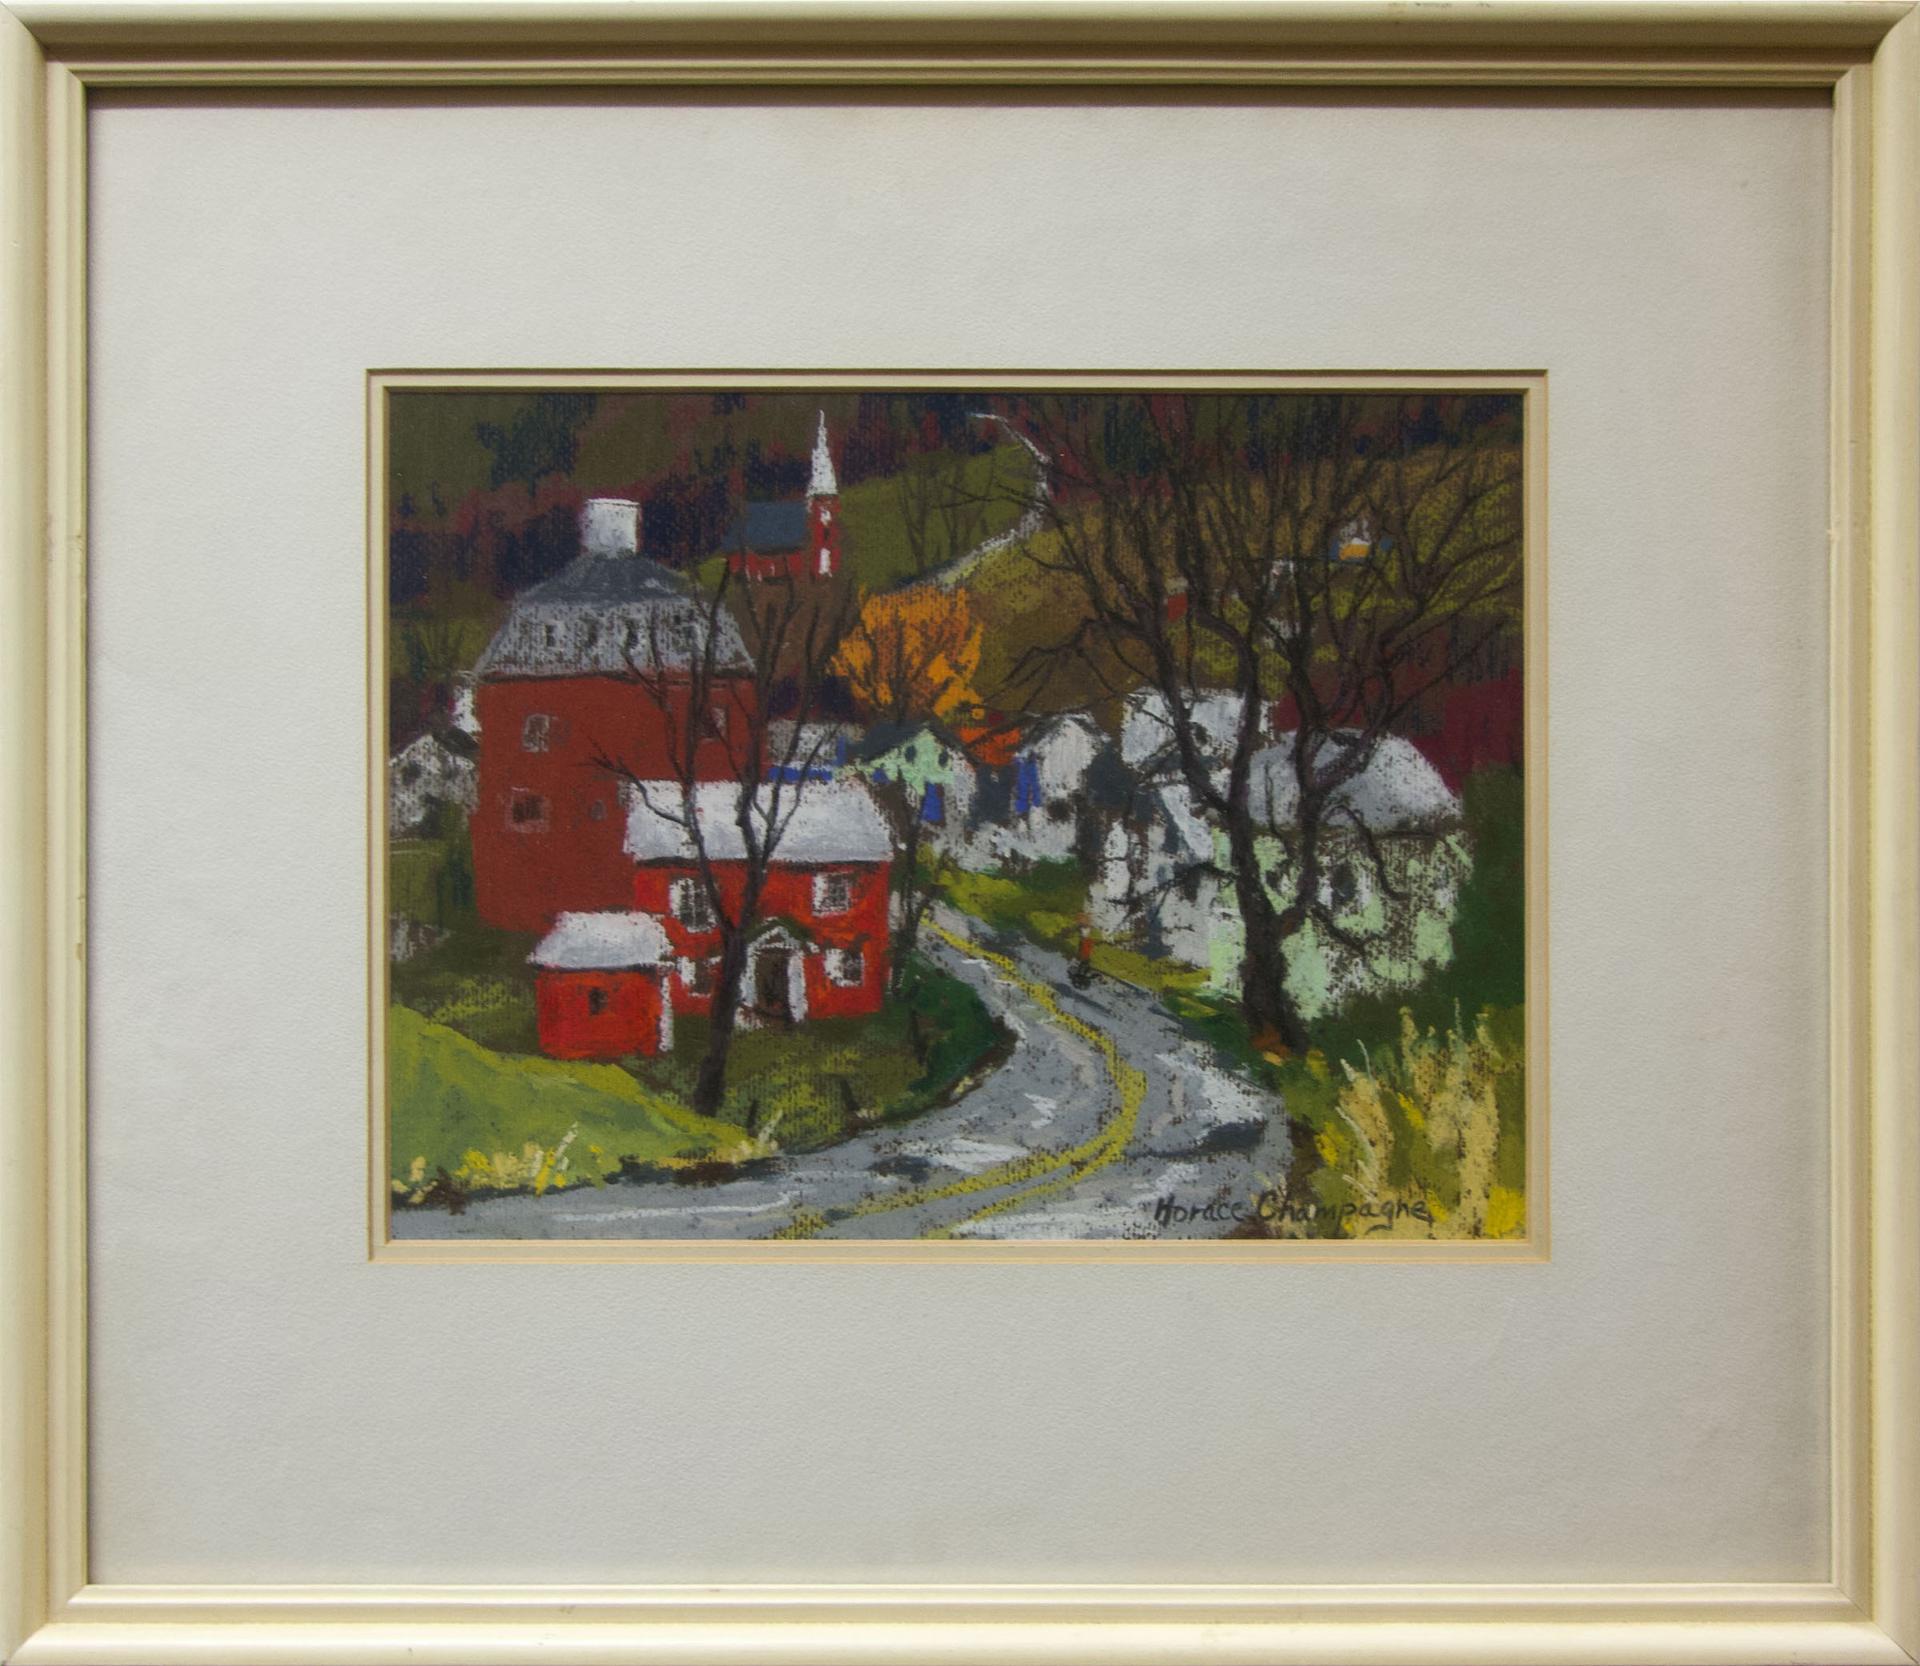 Horace Champagne (1937) - The Red House, Frelighsburg, Eastern Townships, Quebec